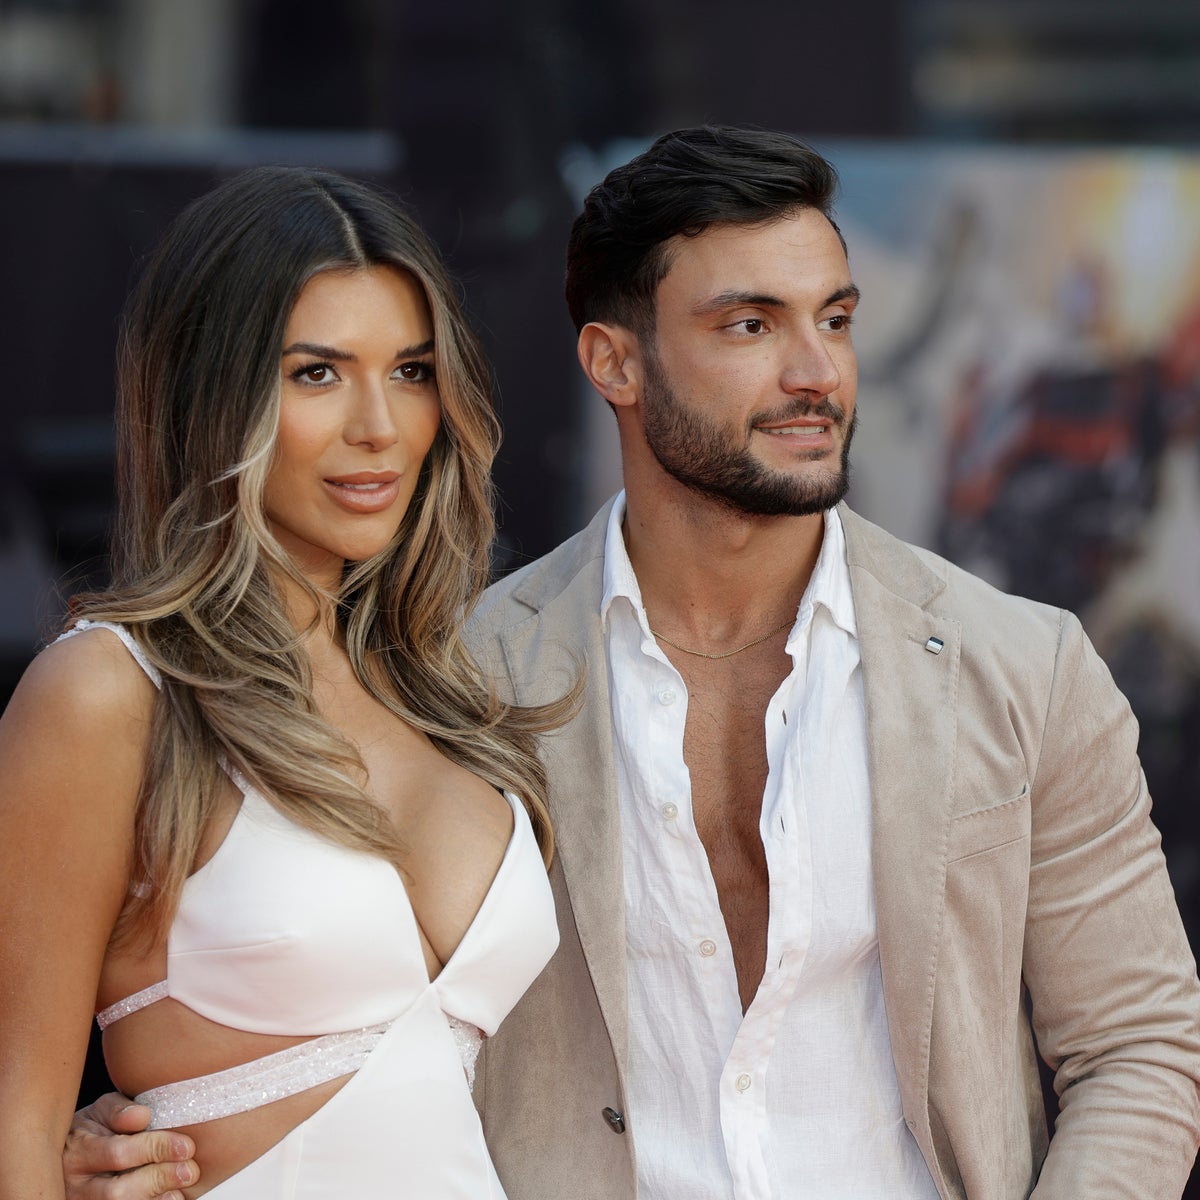 Ekin Su En Davide Love Island stars Ekin-Su and Davide appear to be dating again after  romantic trip to Turkey | The Independent